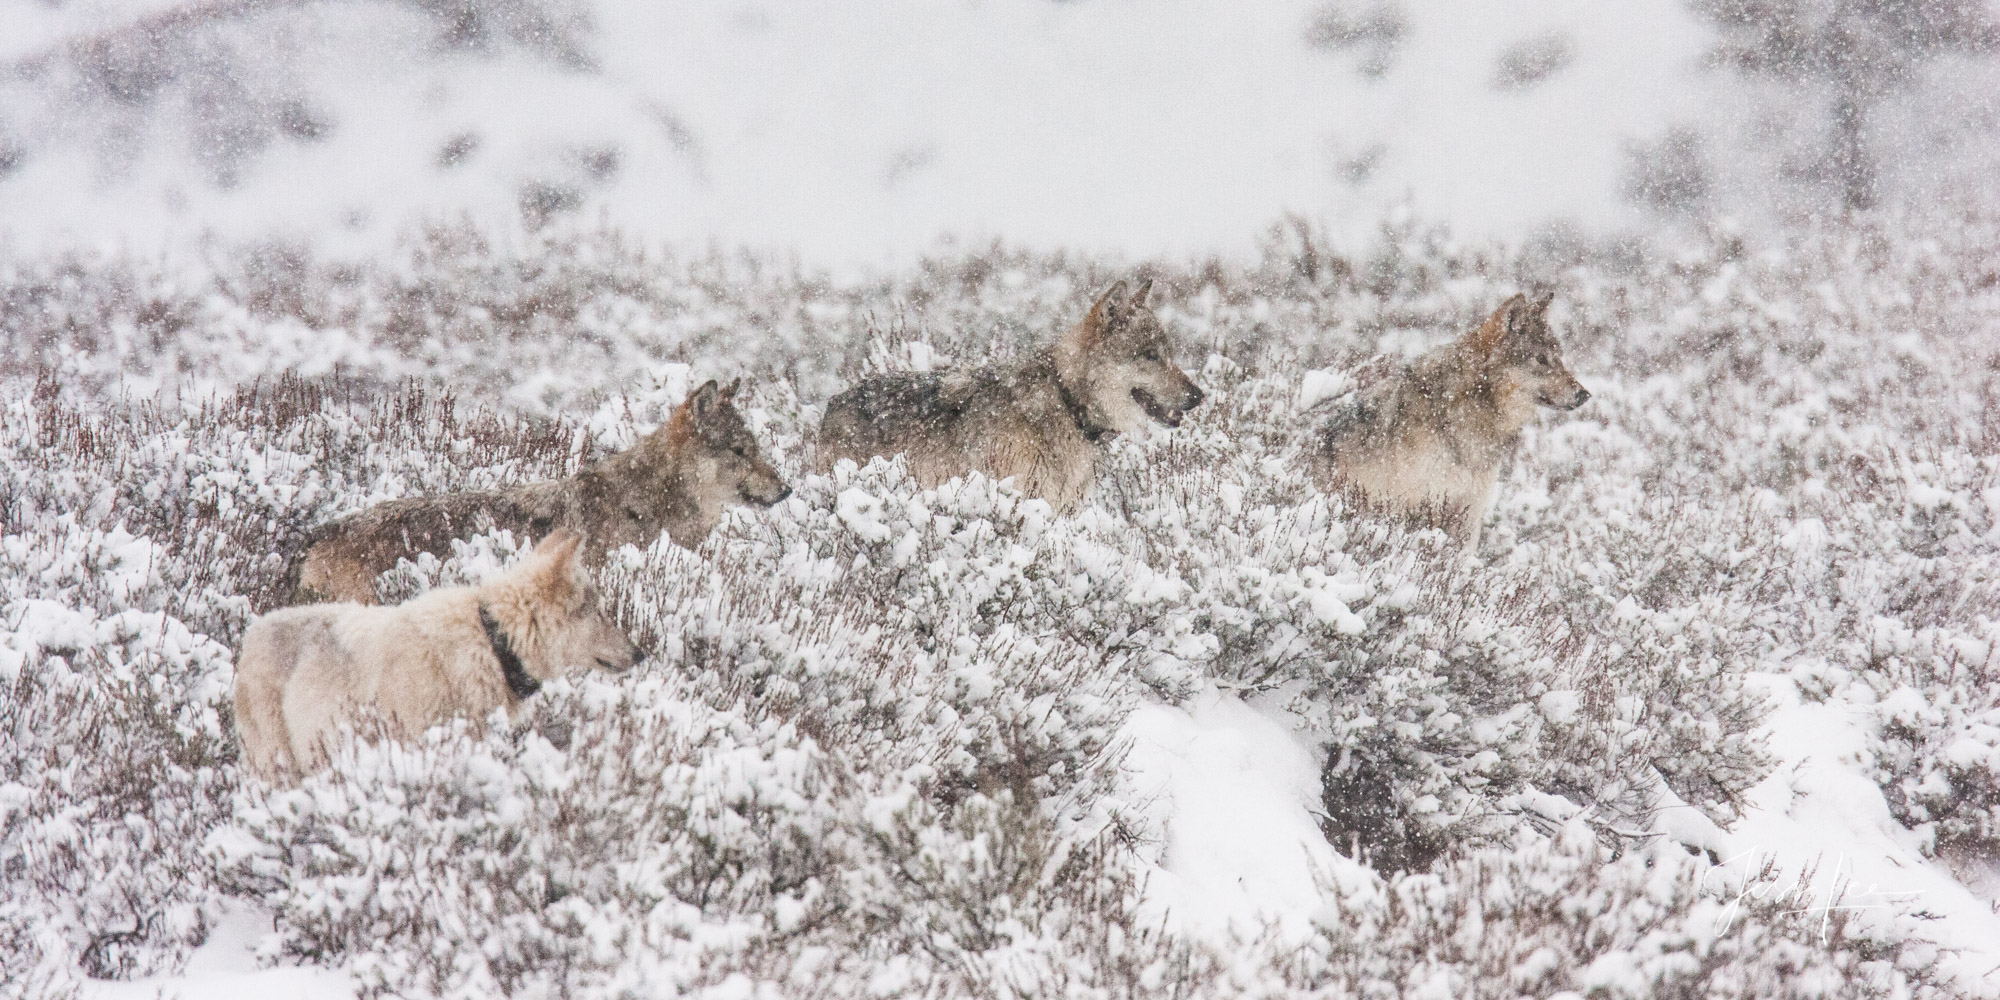 Frosty Yellowstone Wolf in the Wild. Exclusive limited edition photo of 200 prints by Jess Lee